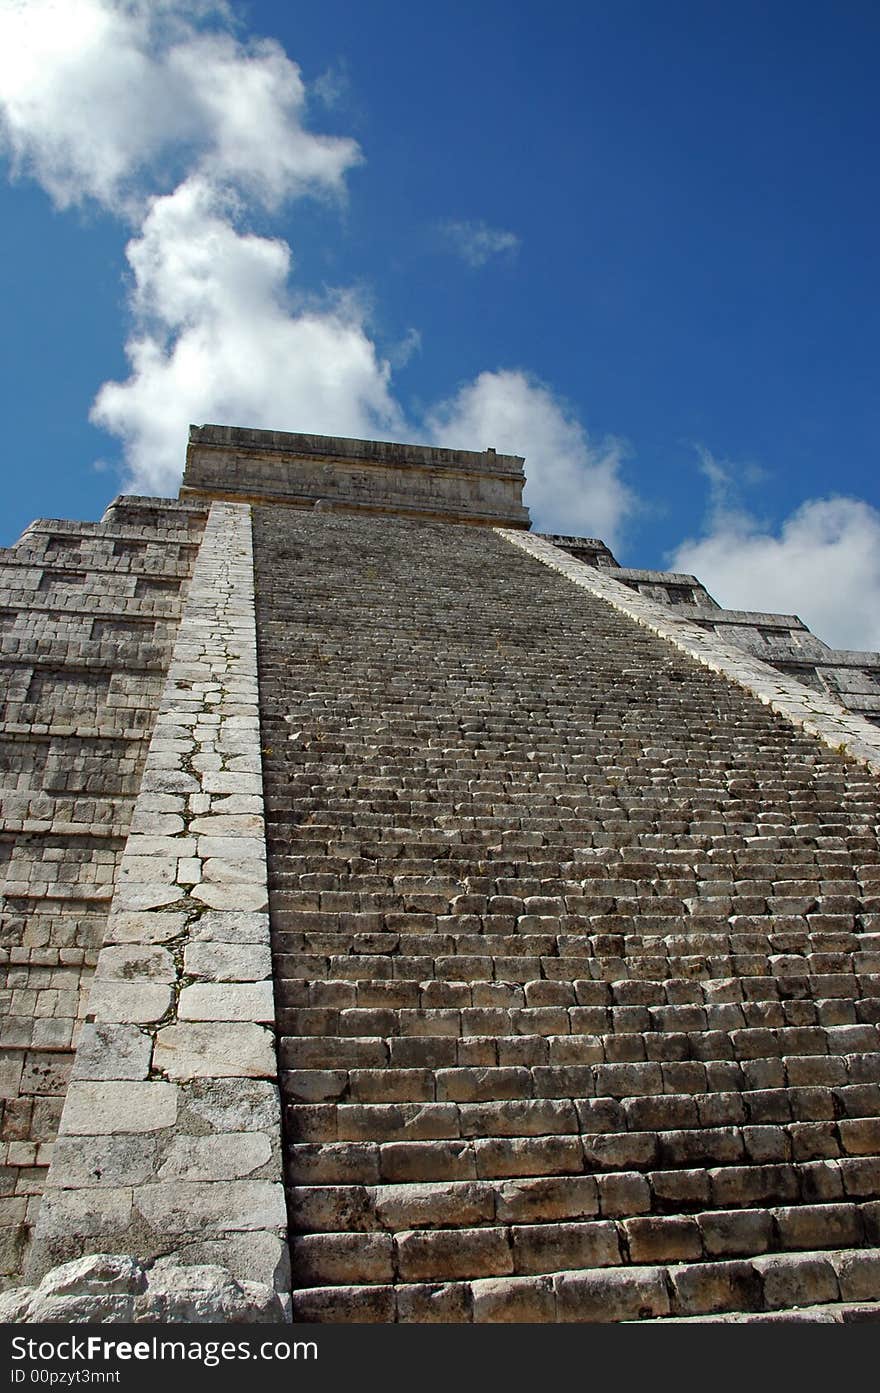 Abstract view of steps leading to the top of an Ancient Mayan Pyramid in the Yucatan. Abstract view of steps leading to the top of an Ancient Mayan Pyramid in the Yucatan